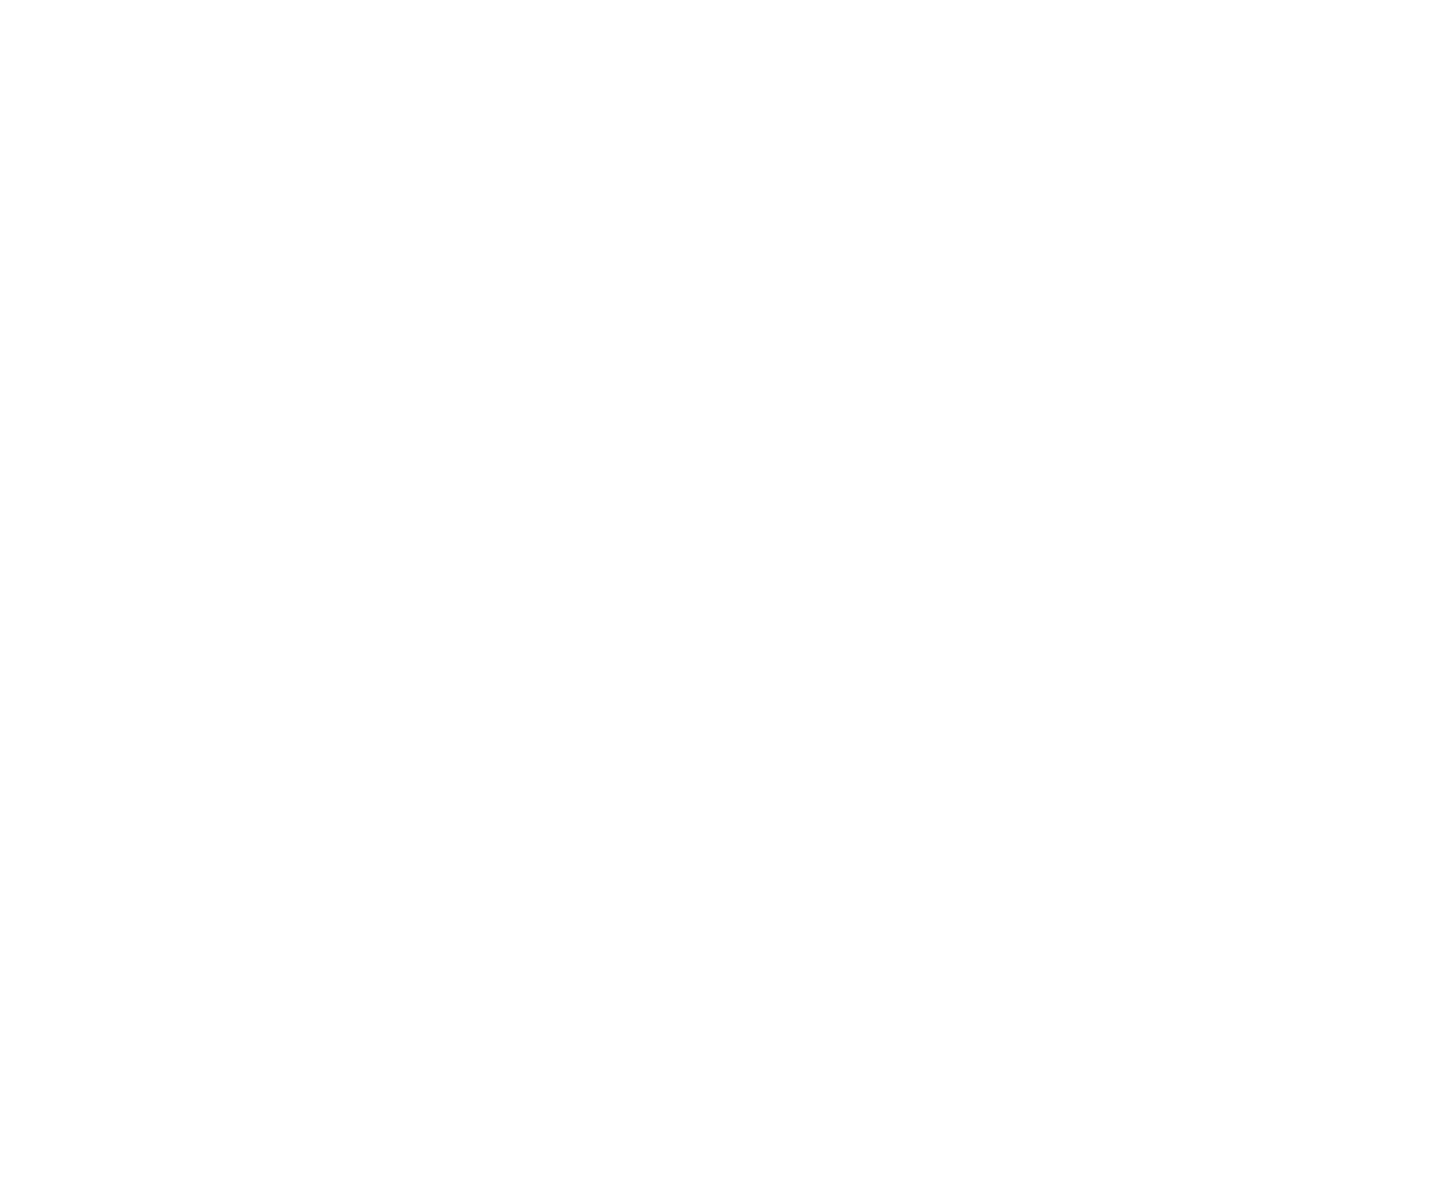 Trunk Works